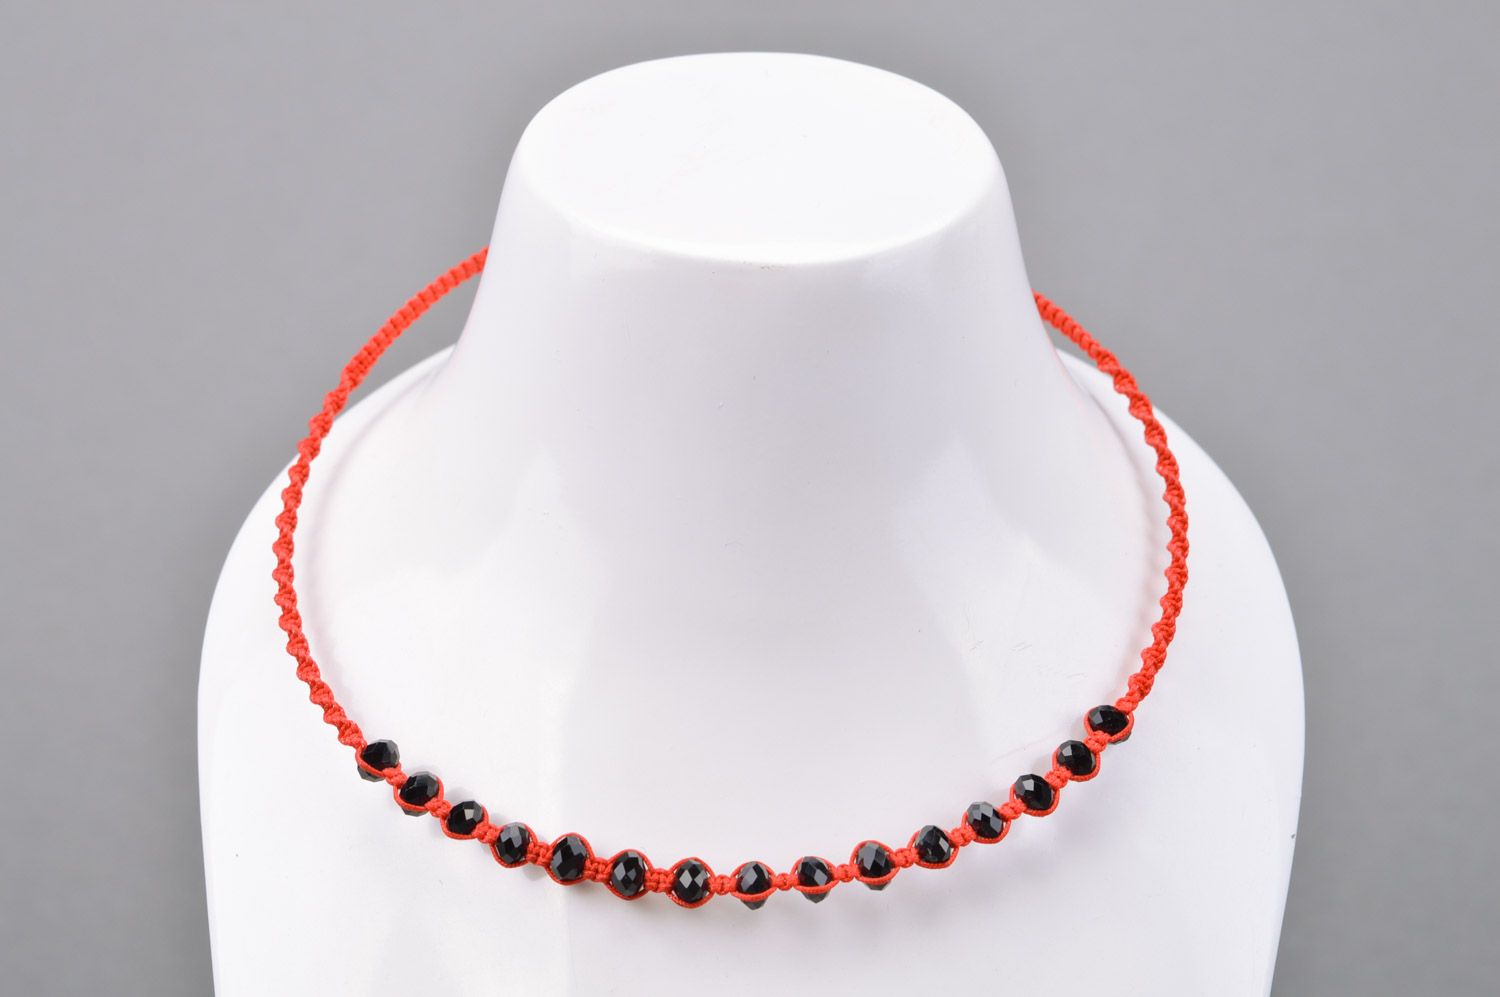 Handmade necklace woven of red threads and black beads on wire frame for women photo 1